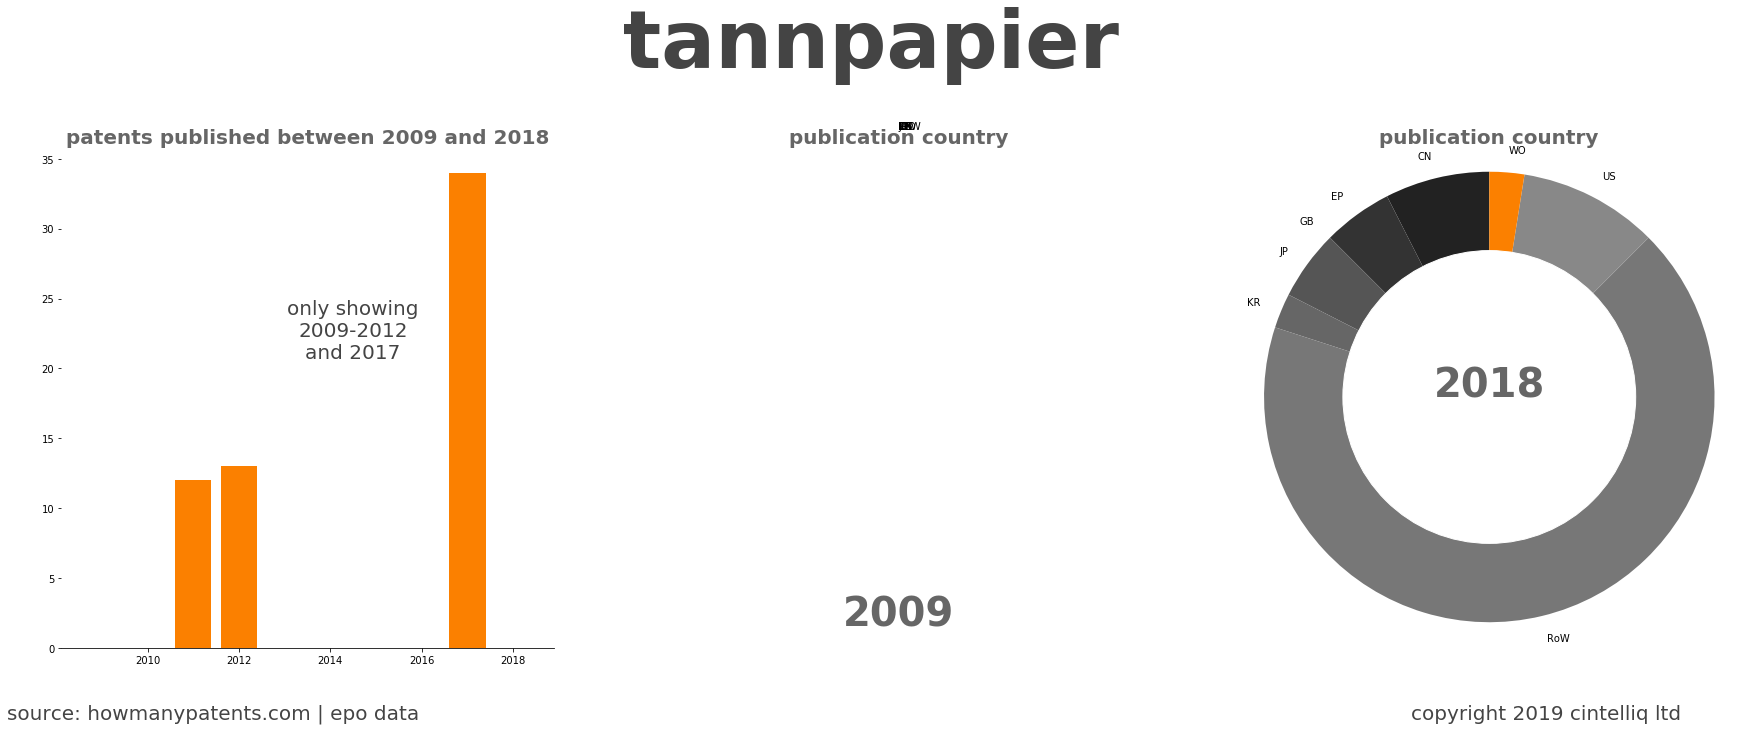 summary of patents for Tannpapier